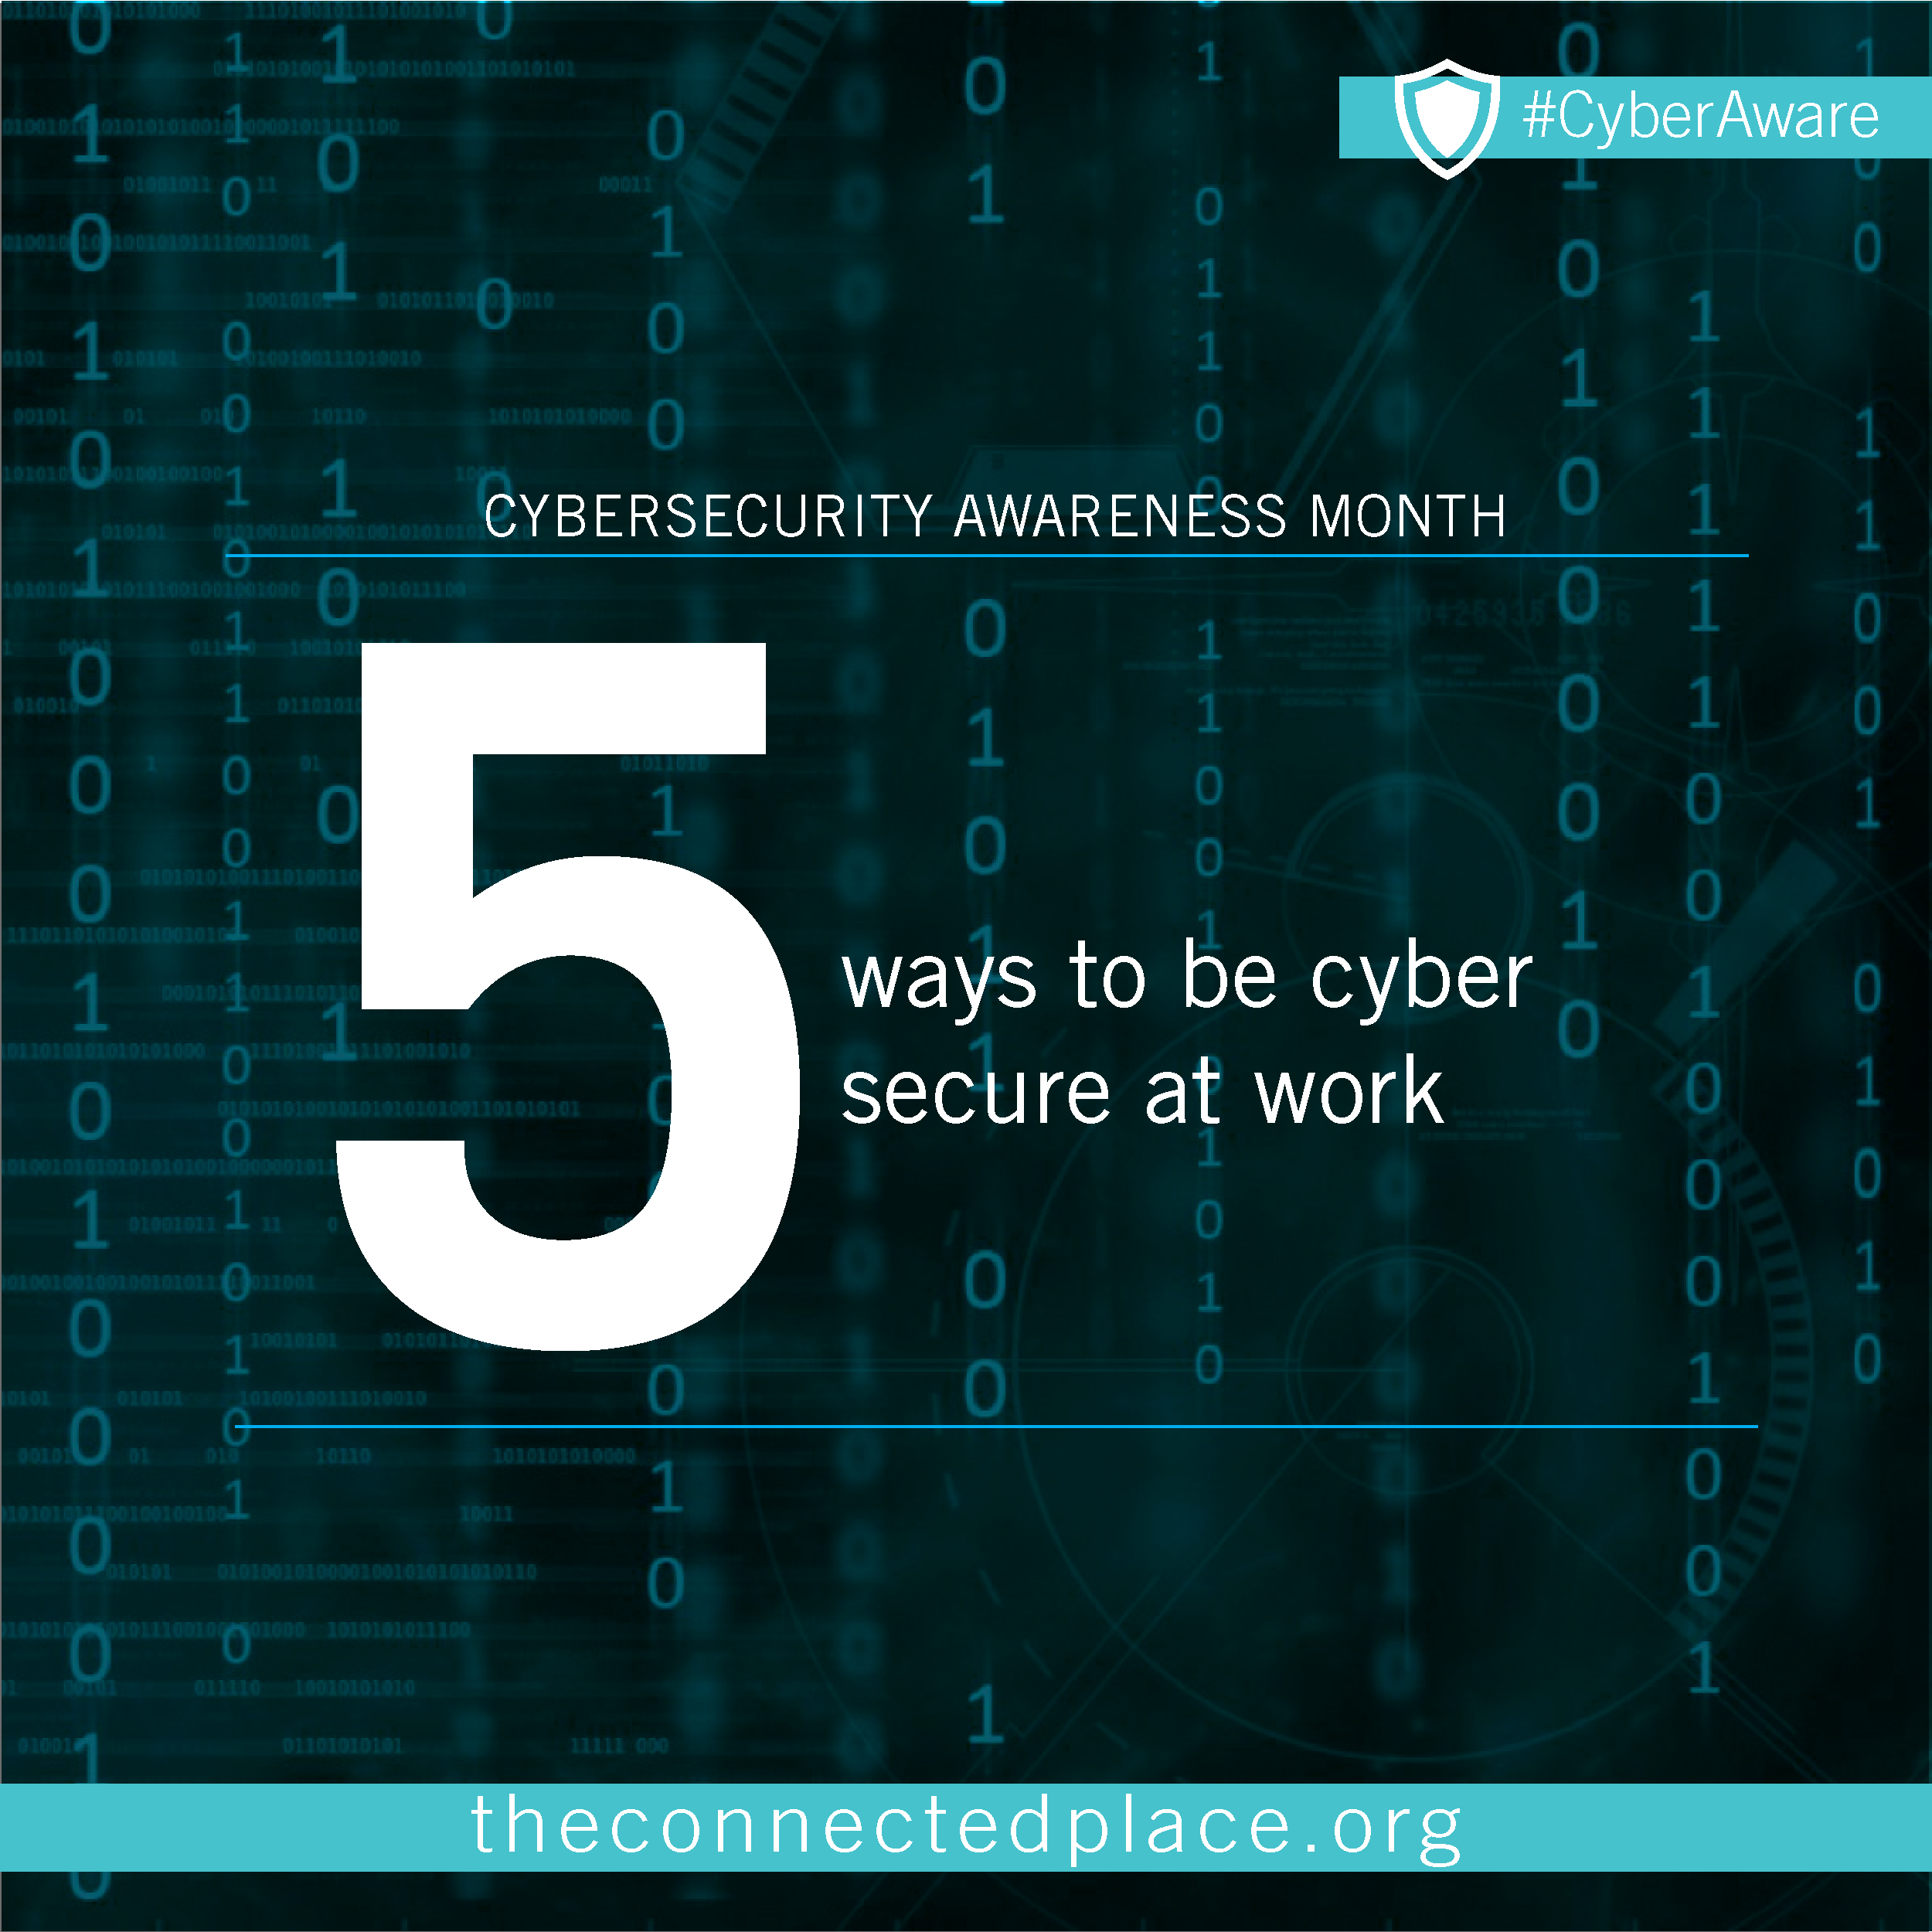 5 ways to be cyber secure at work